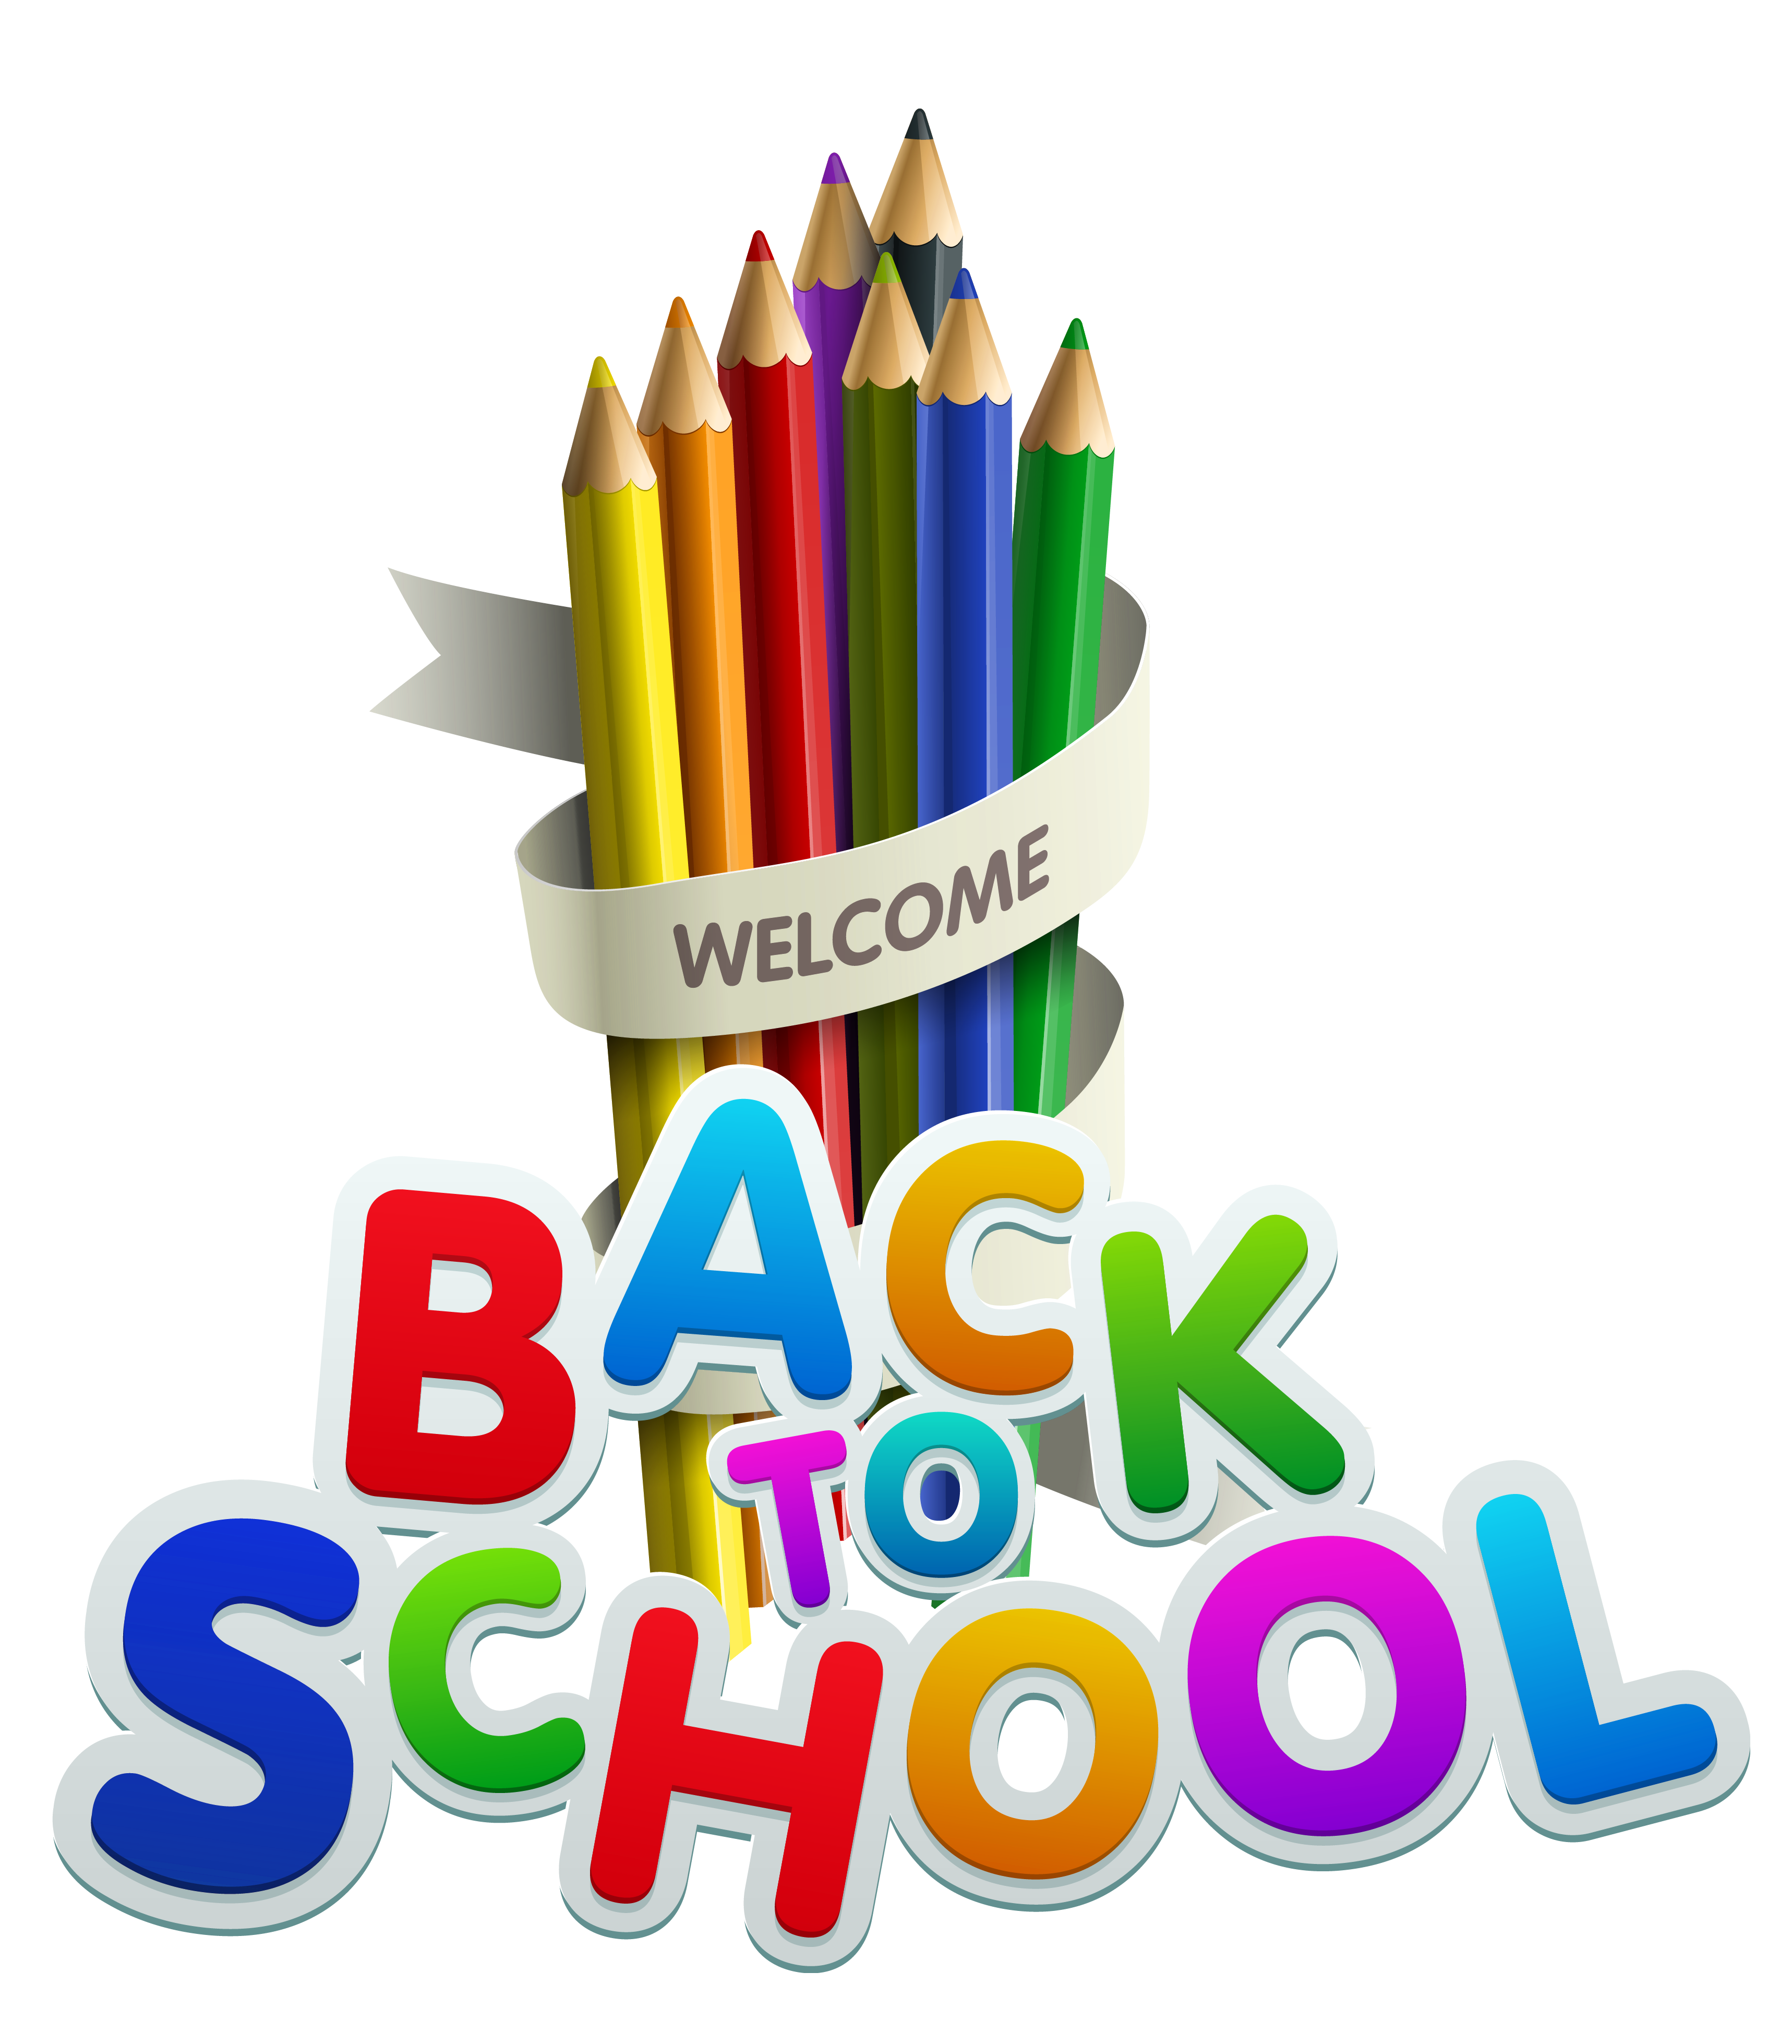 back to school bash clipart - photo #28